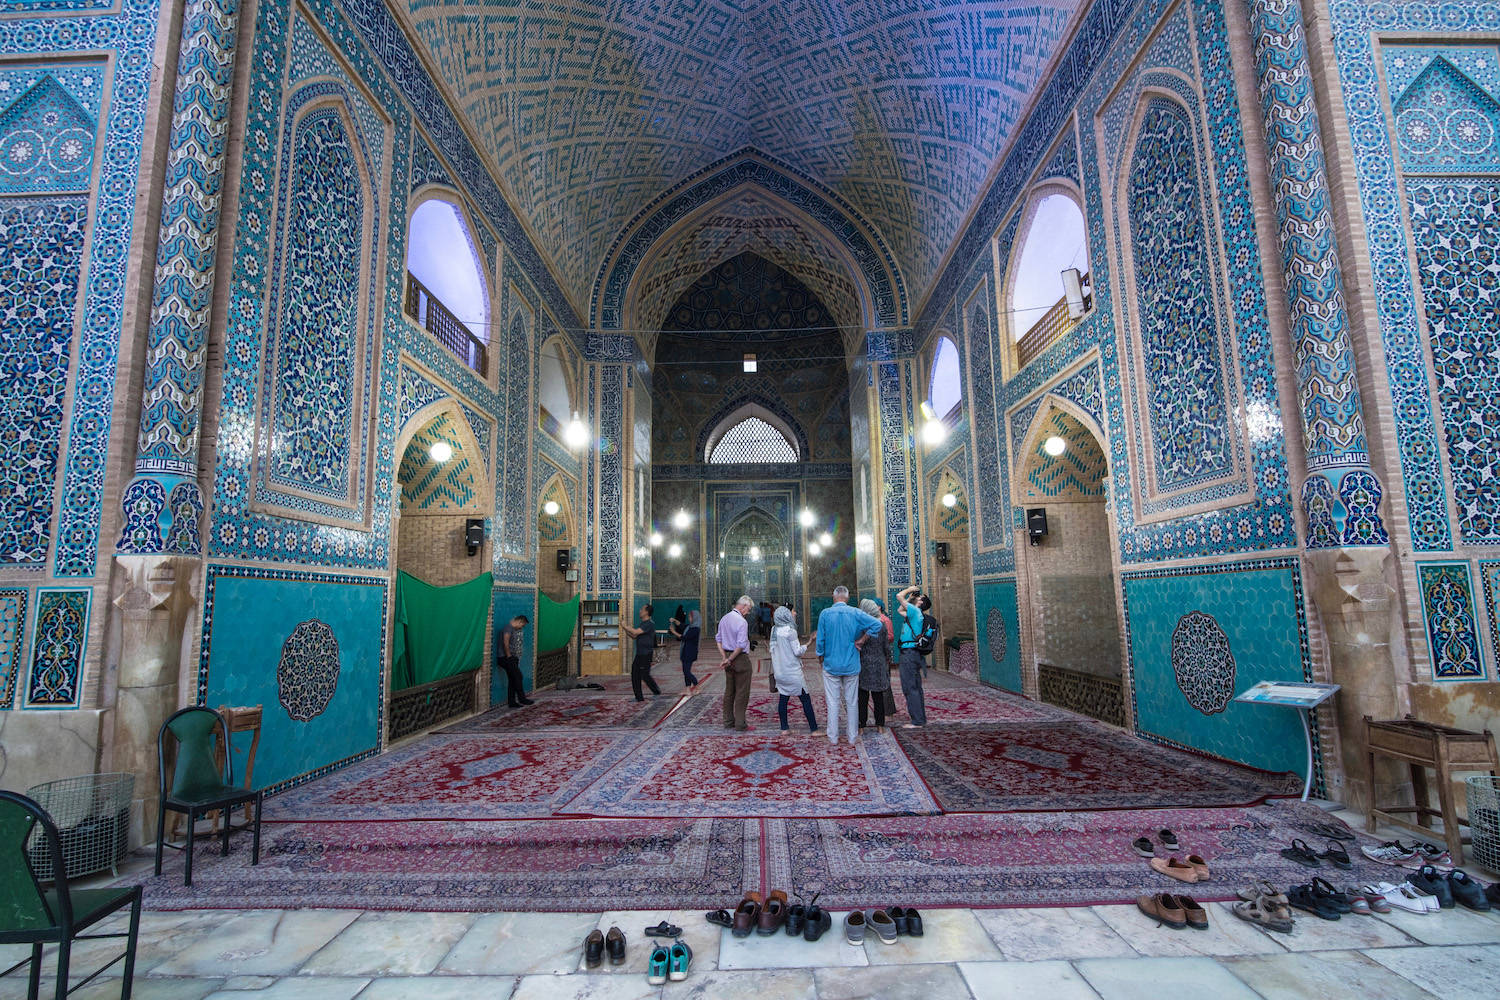 Breathtaking View Inside a Traditional Iranian Mosque Wallpaper